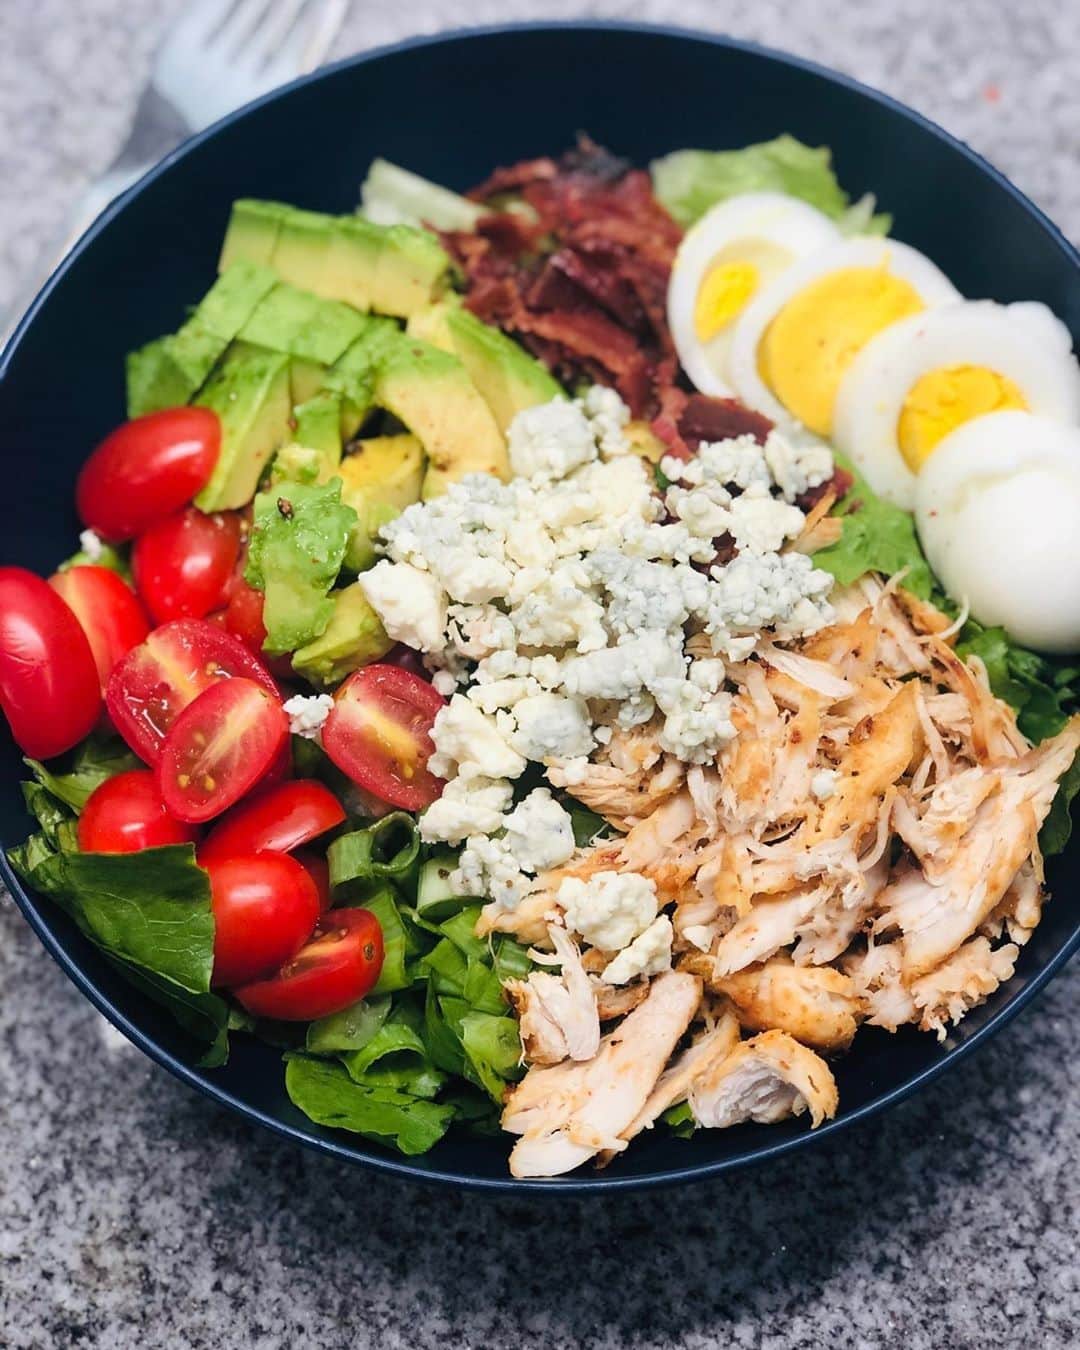 Flavorgod Seasoningsさんのインスタグラム写真 - (Flavorgod SeasoningsInstagram)「Customer @melwade60 with a Fresh Cobb Salad.⁠ 🍗 Grilled chicken breast or roasted chickpeas (seasoned with @flavorgod Bacon Lovers Seasoning).⁠ -⁠ Add delicious flavors to your meals!⬇️⁠ Click link in the bio -> @flavorgod  www.flavorgod.com⁠ -⁠ 🥓 Crispy bacon, crumbled (optional)⁠ 🍅 Grape tomatoes, sliced⁠ 🥬 1 large head romaine lettuce, chopped⁠ 🥑 Avocado, sliced.⁠ 🧅 Green onions, sliced⁠ 🥚 Boiled egg, sliced⁠ 🧀 Blue cheese crumbles⁠ Topped with blue cheese dressing and Flavorgod Himalayan Salt & Pink Peppercorn Seasoning .⁠ -⁠ Flavor God Seasonings are:⁠ 💥 Zero Calories per Serving ⁠ 🙌 0 Sugar per Serving⁠ 🔥 #KETO & #PALEO Friendly⁠ 🌱 GLUTEN FREE & #KOSHER⁠ ☀️ VEGAN-FRIENDLY ⁠ 🌊 Low salt⁠ ⚡️ NO MSG⁠ 🚫 NO SOY⁠ 🥛 DAIRY FREE *except Ranch ⁠ 🌿 All Natural & Made Fresh⁠ ⏰ Shelf life is 24 months⁠ -⁠ #food #foodie #flavorgod #seasonings #glutenfree #mealprep #seasonings #breakfast #lunch #dinner #yummy #delicious #foodporn」7月7日 8時01分 - flavorgod